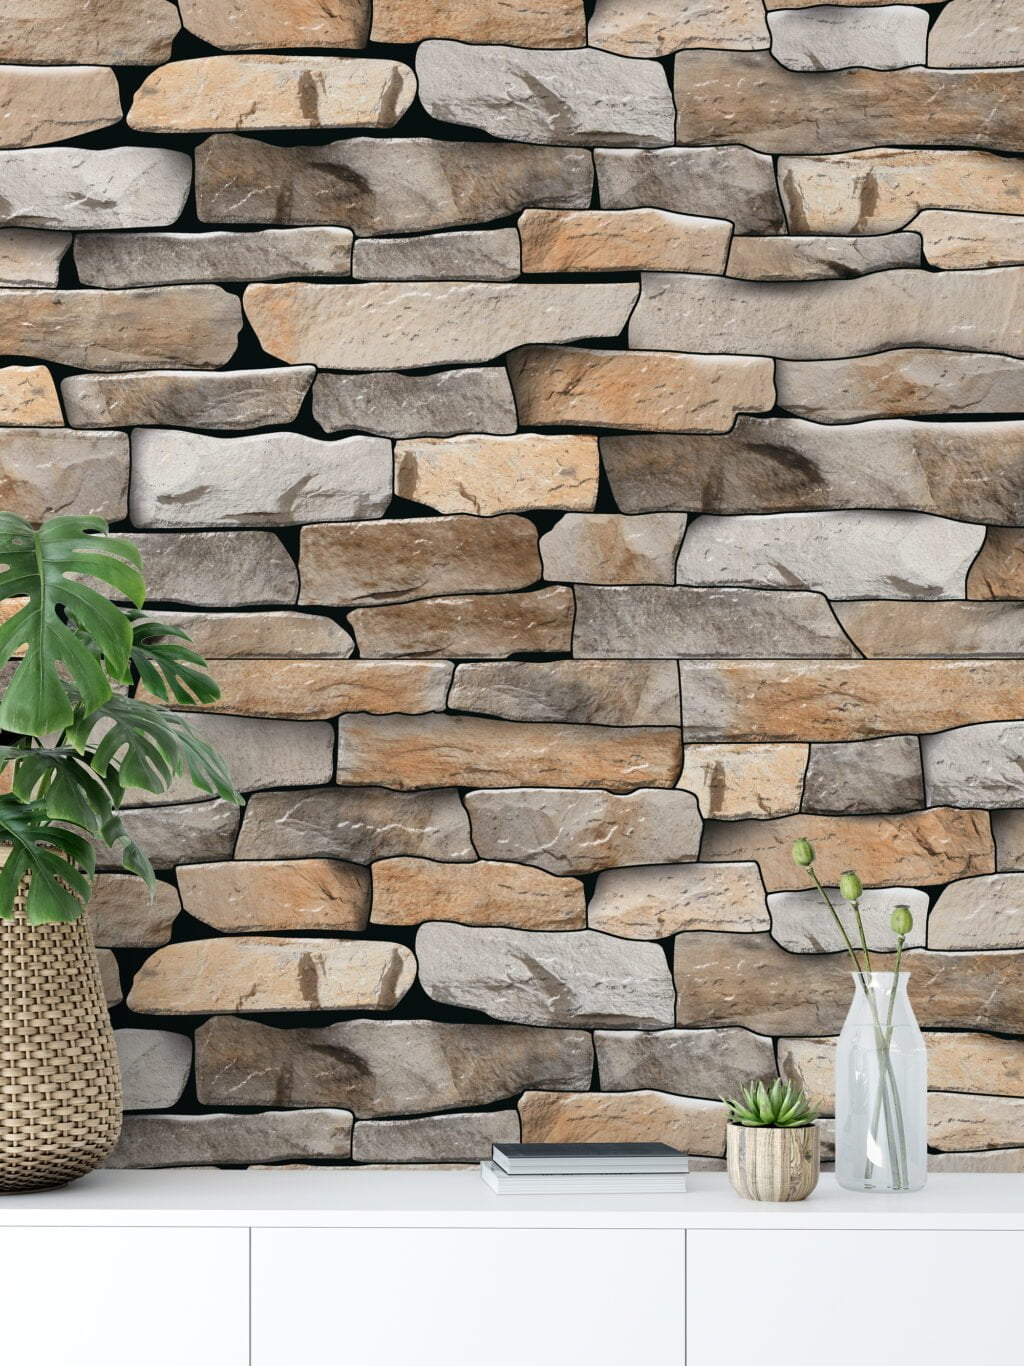 Rustic Style Stone Brick Wall Wallpaper, Natural Stacked Stone Peel & Stick Wall Mural